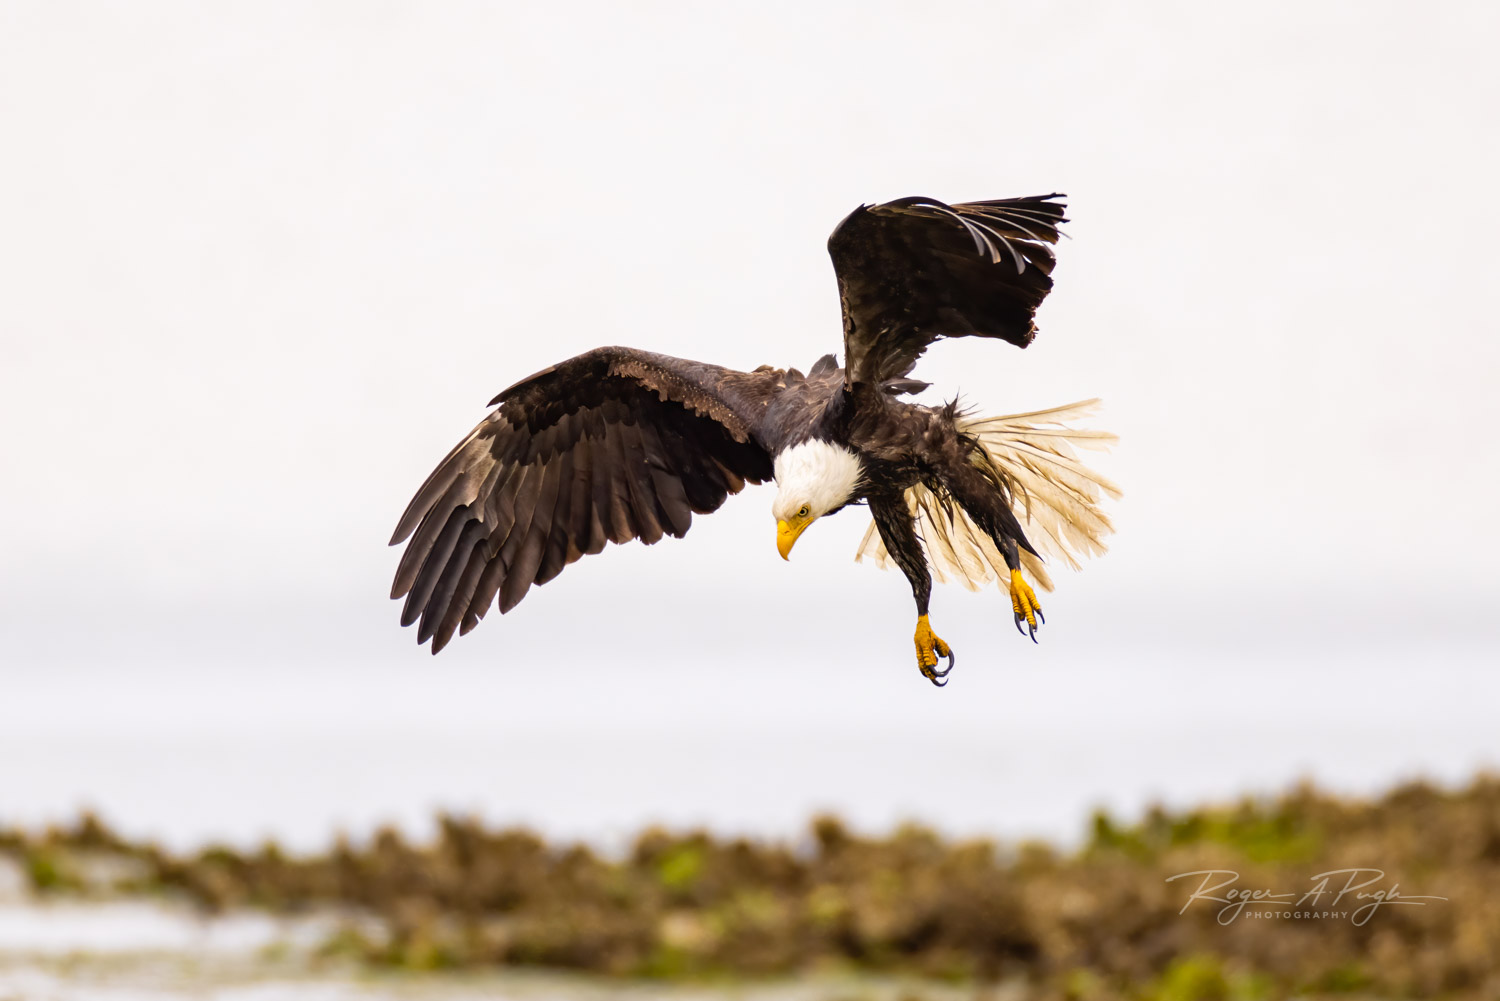 This eagle was flying by and in an instant she pivoted and turned back to grab a fish left by a heron.